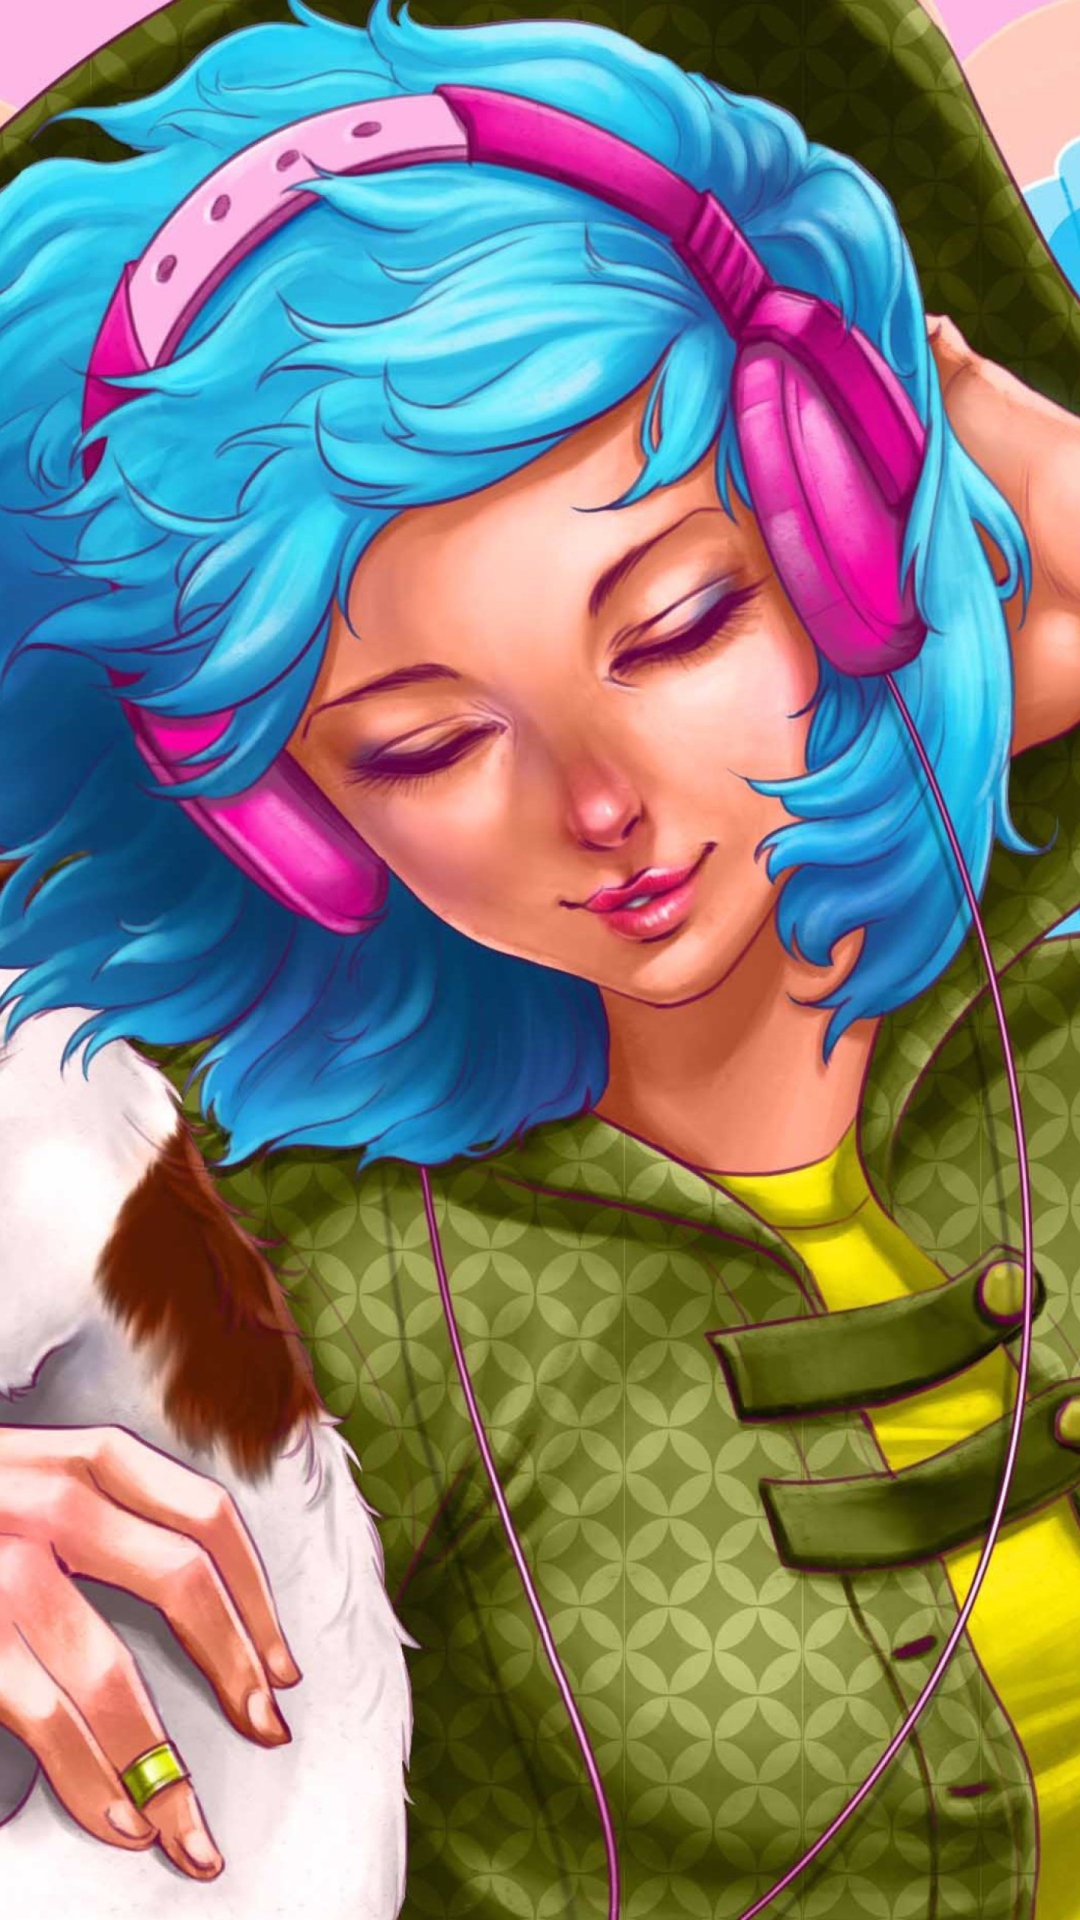 Das Girl With Blue Hair And Pink Headphones Drawing Wallpaper 1080x1920